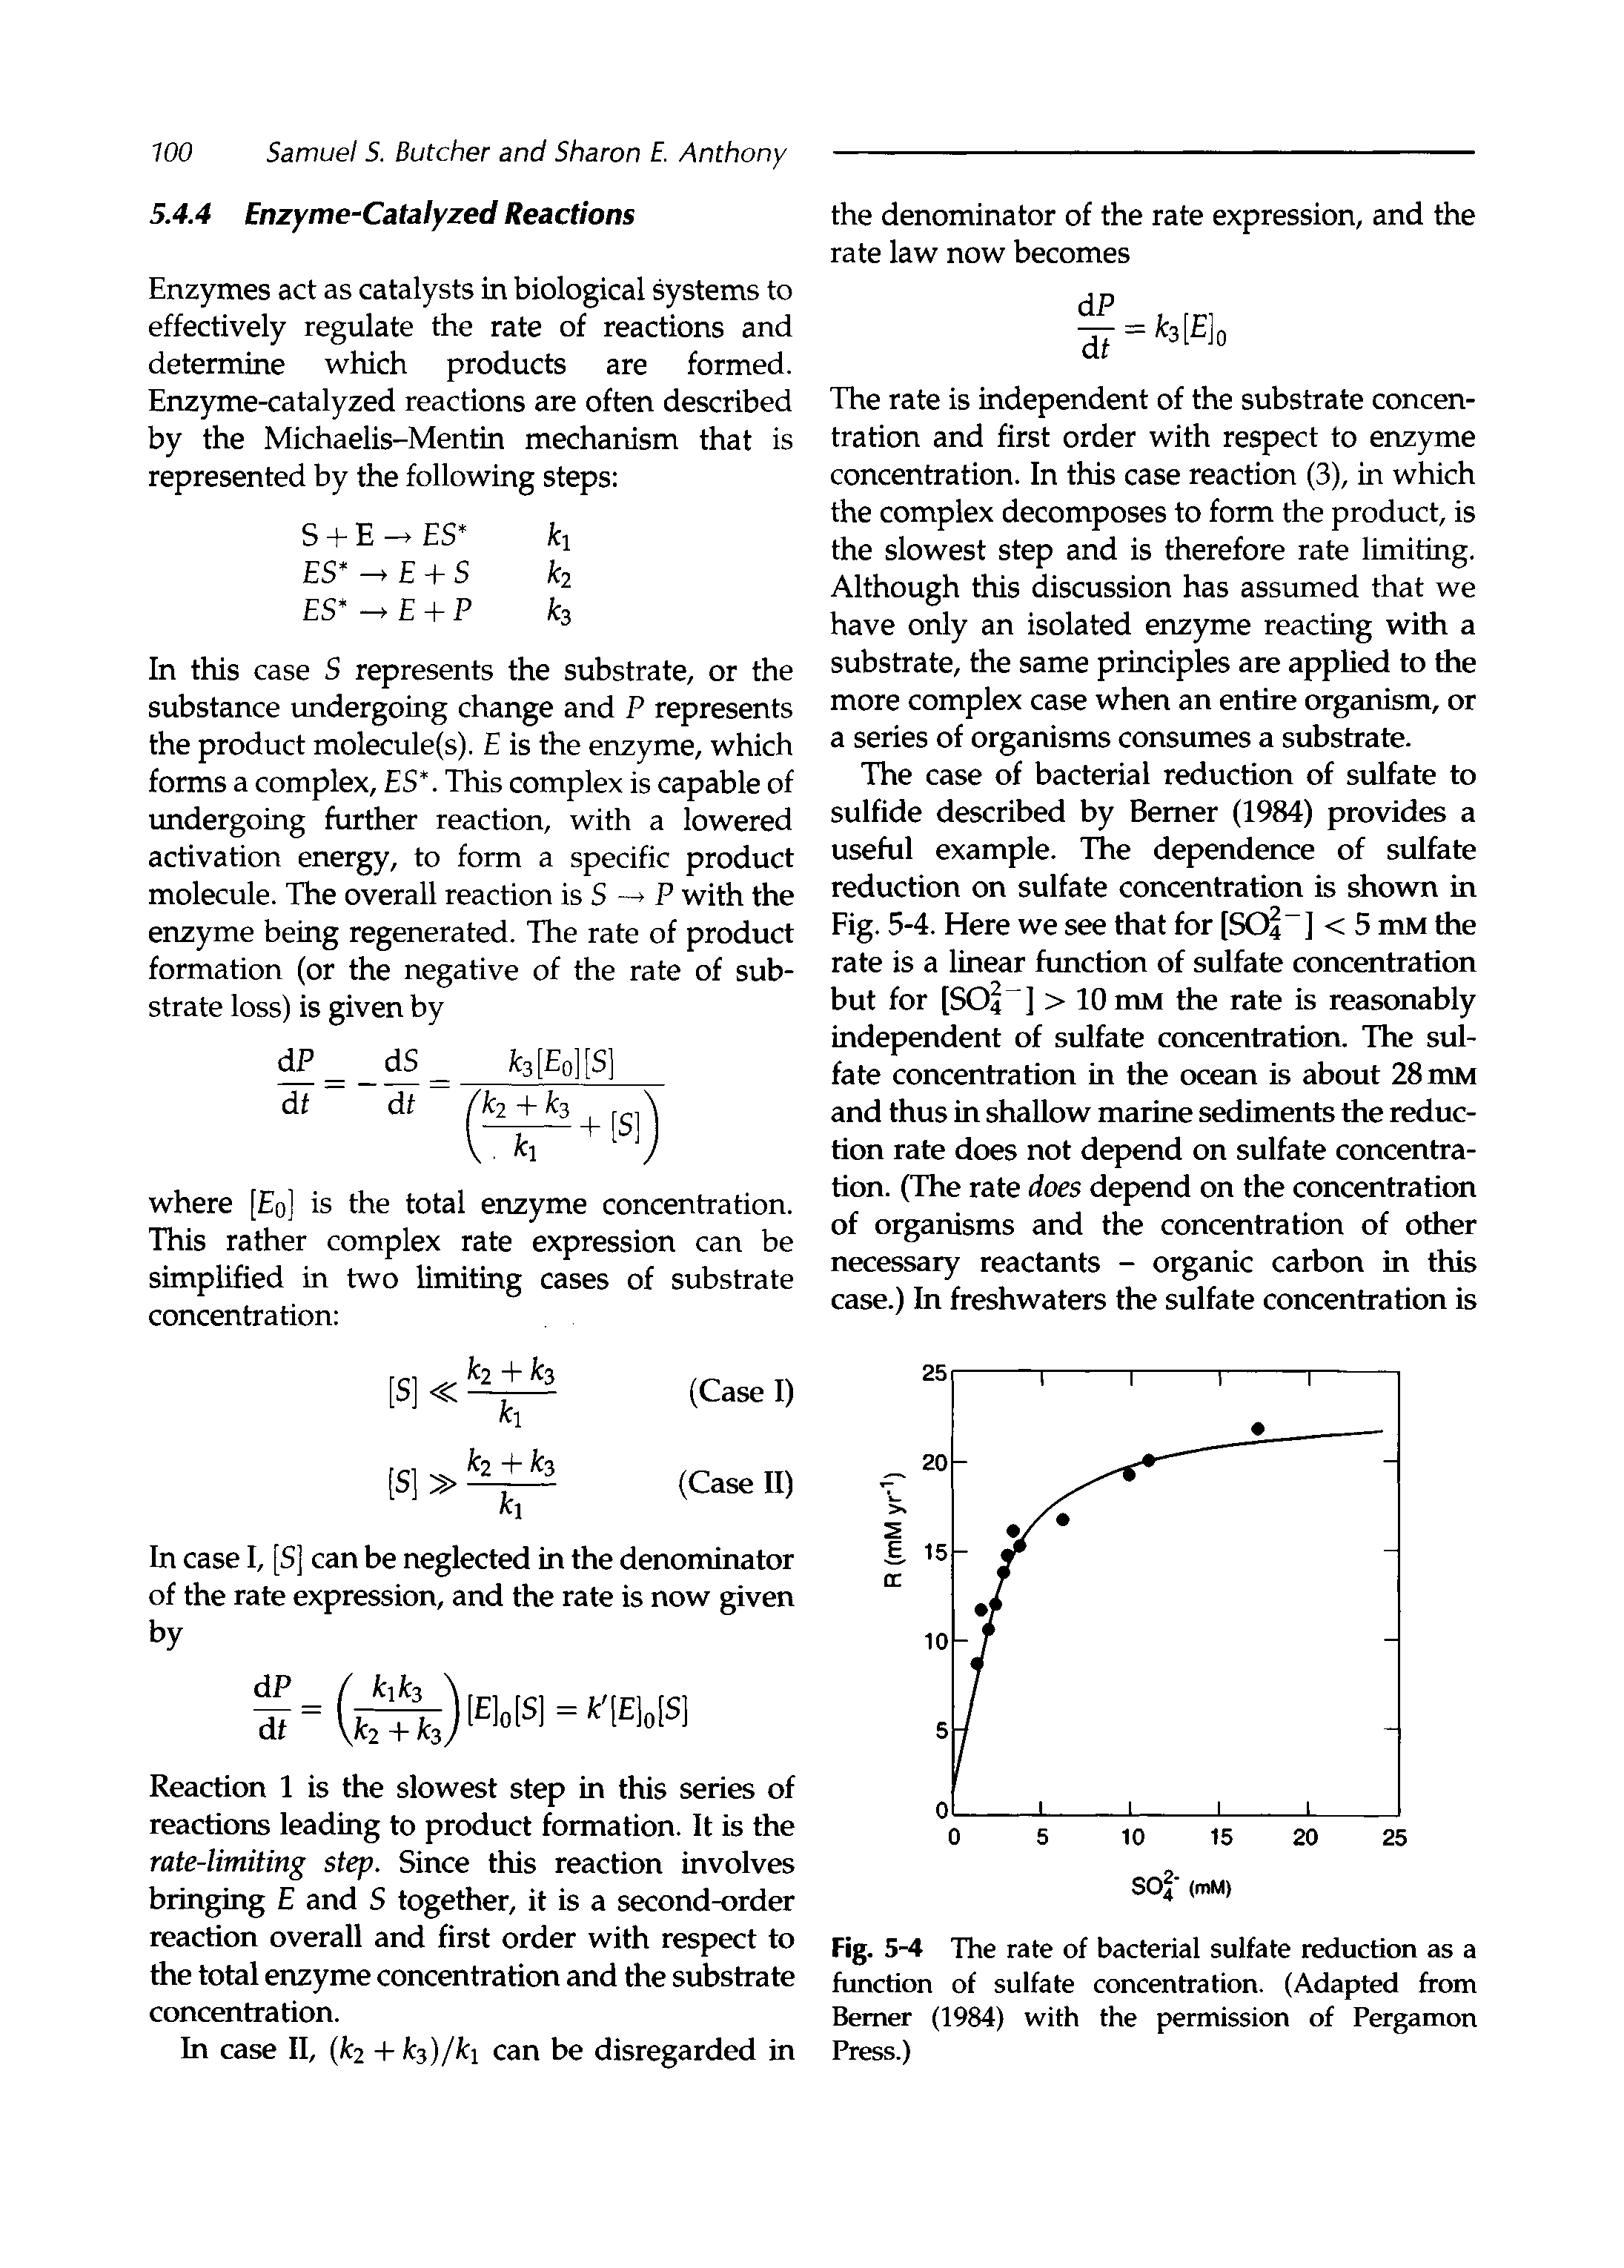 Fig. 5-4 The rate of bacterial sulfate reduction as a function of sulfate concentration. (Adapted from Berner (1984) with the permission of Pergamon Press.)...